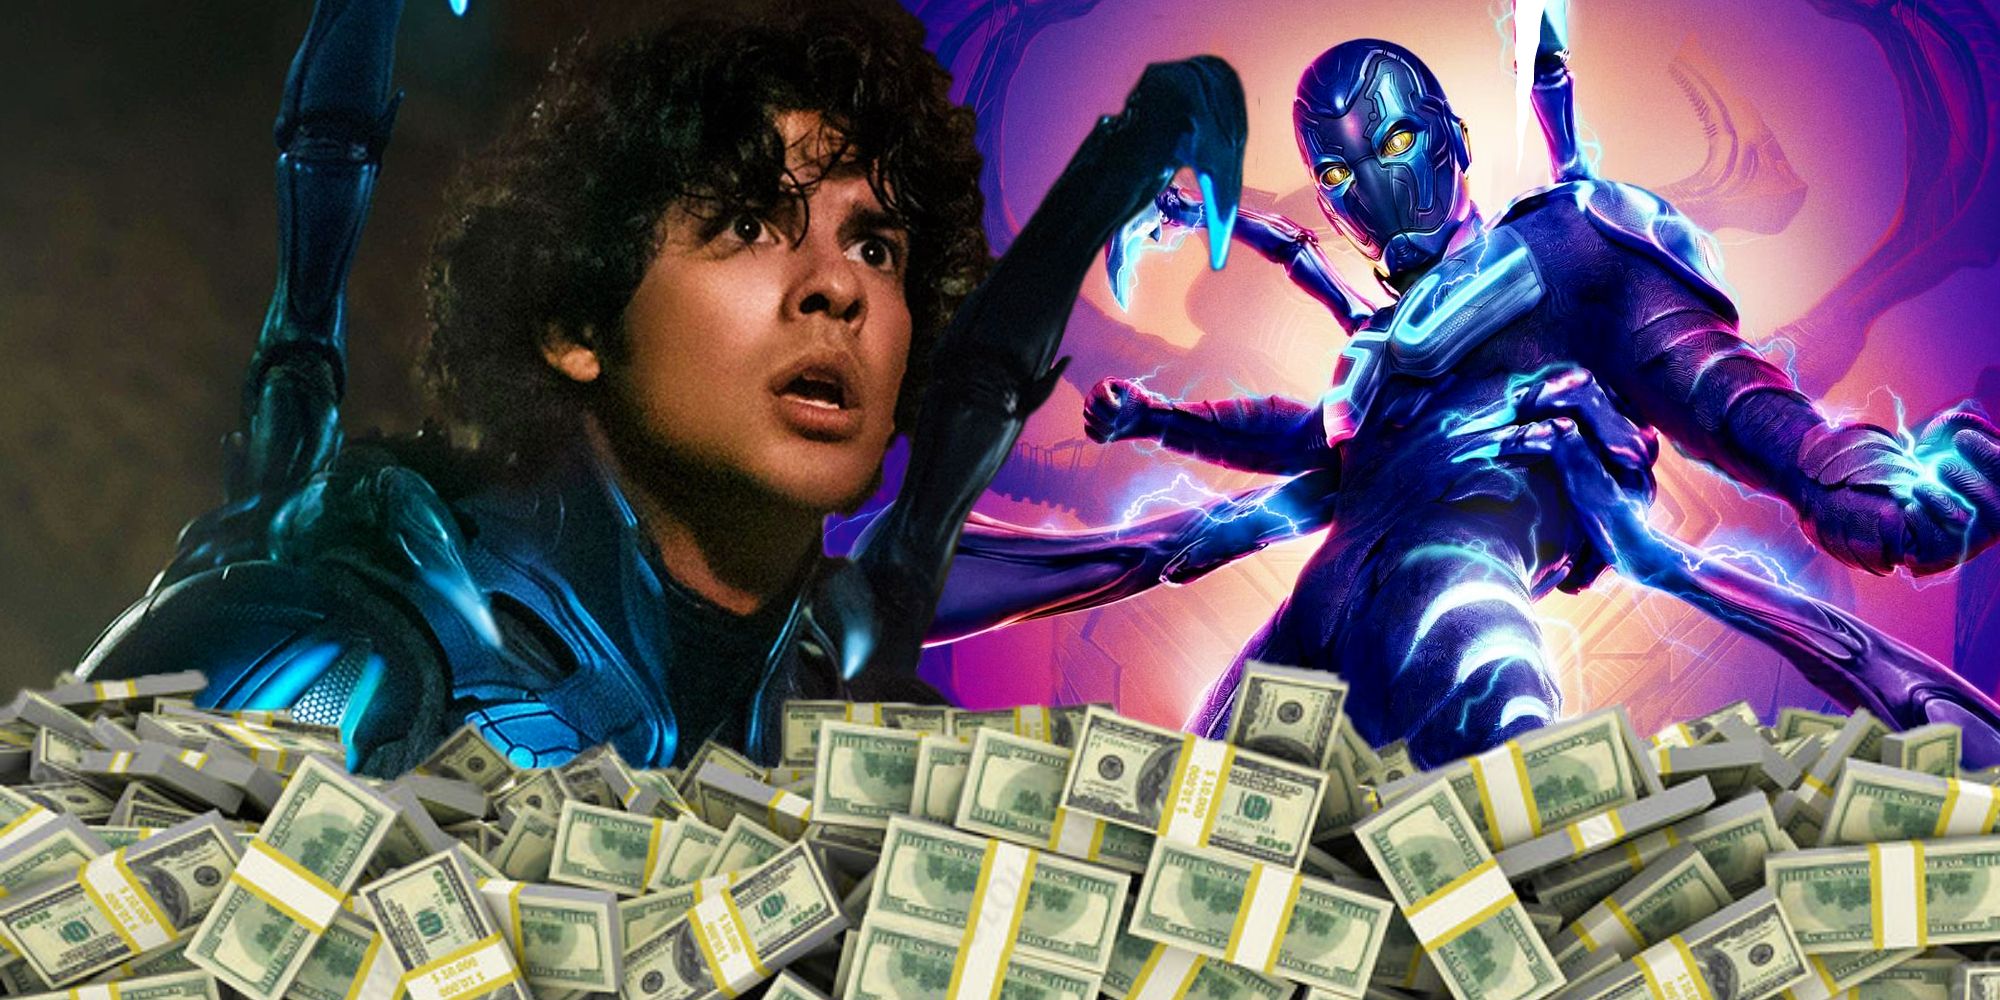 Xolo Meriduena as Blue Beetle next to the film's poster with a stack of dollar bills